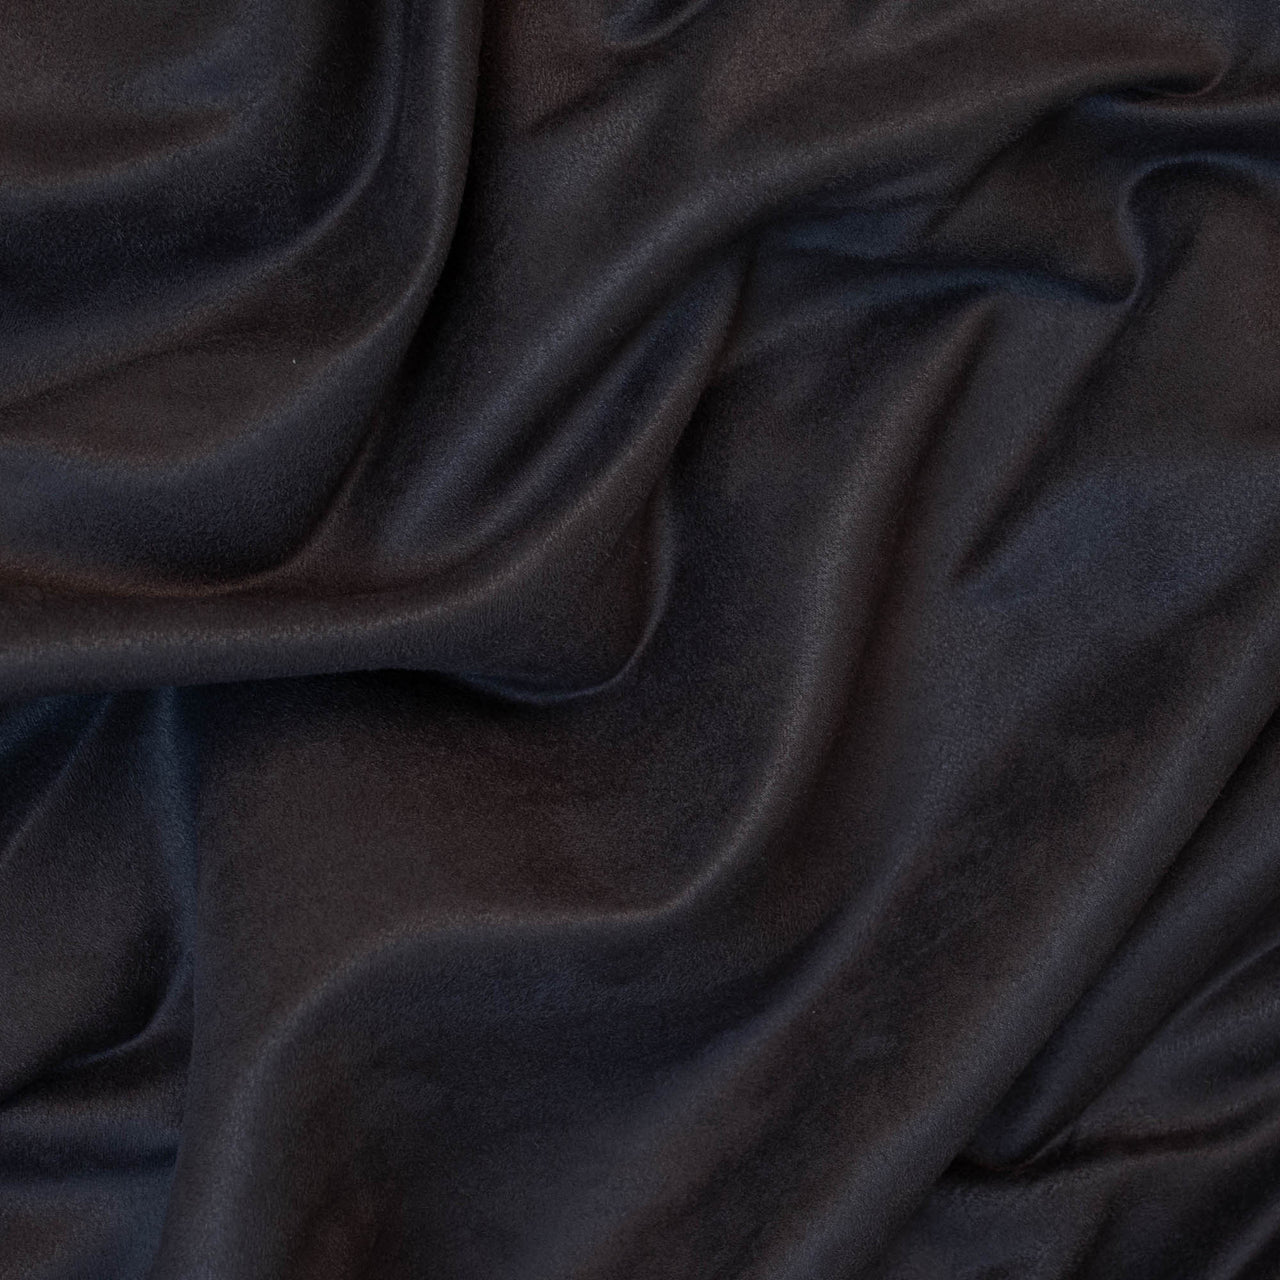 Charcoal - Premium Faux Suede for Car Interior, Interior Design, Upholstery & Soft Furnishings